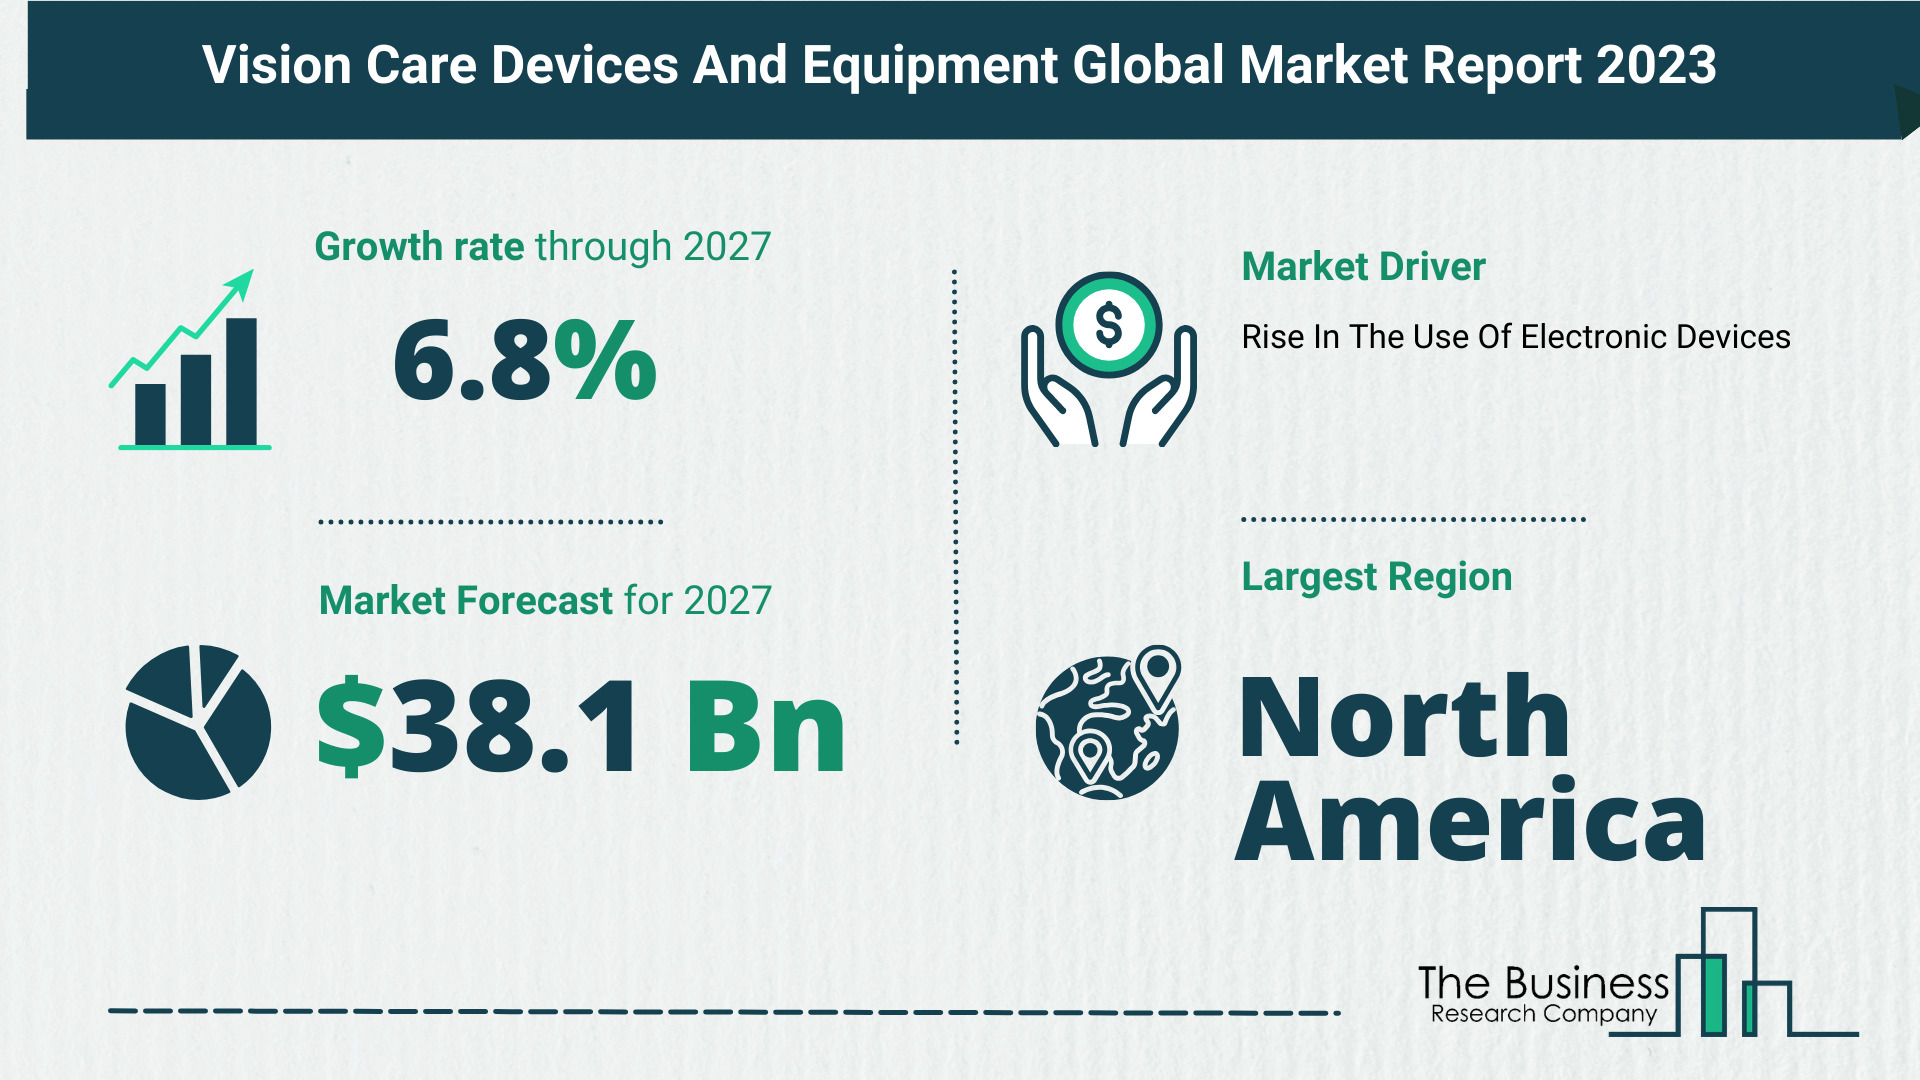 Global Vision Care Devices And Equipment Market Analysis 2023: Size, Share, And Key Trends